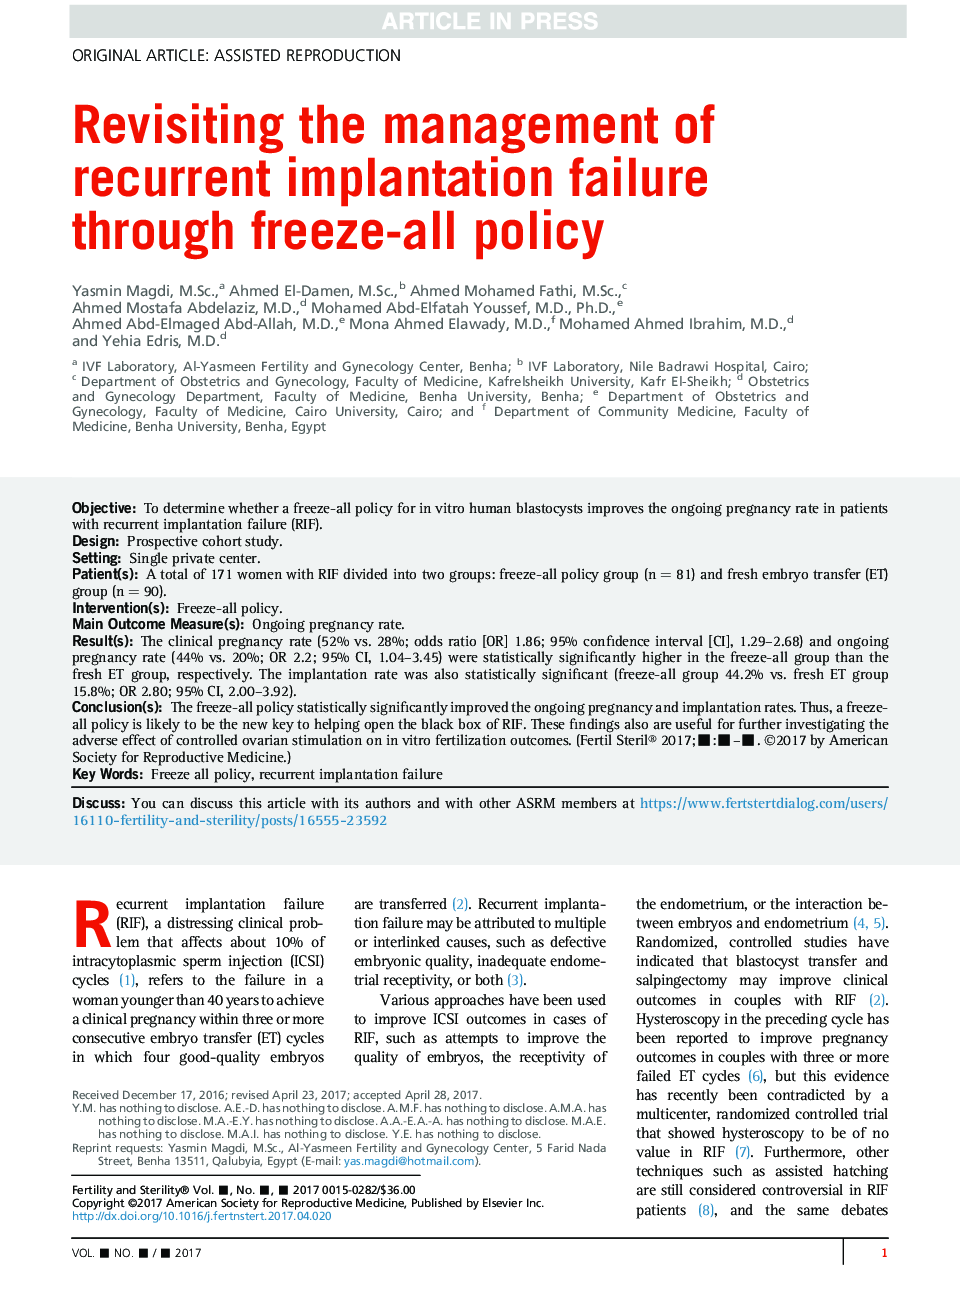 Revisiting the management of recurrent implantation failure through freeze-all policy